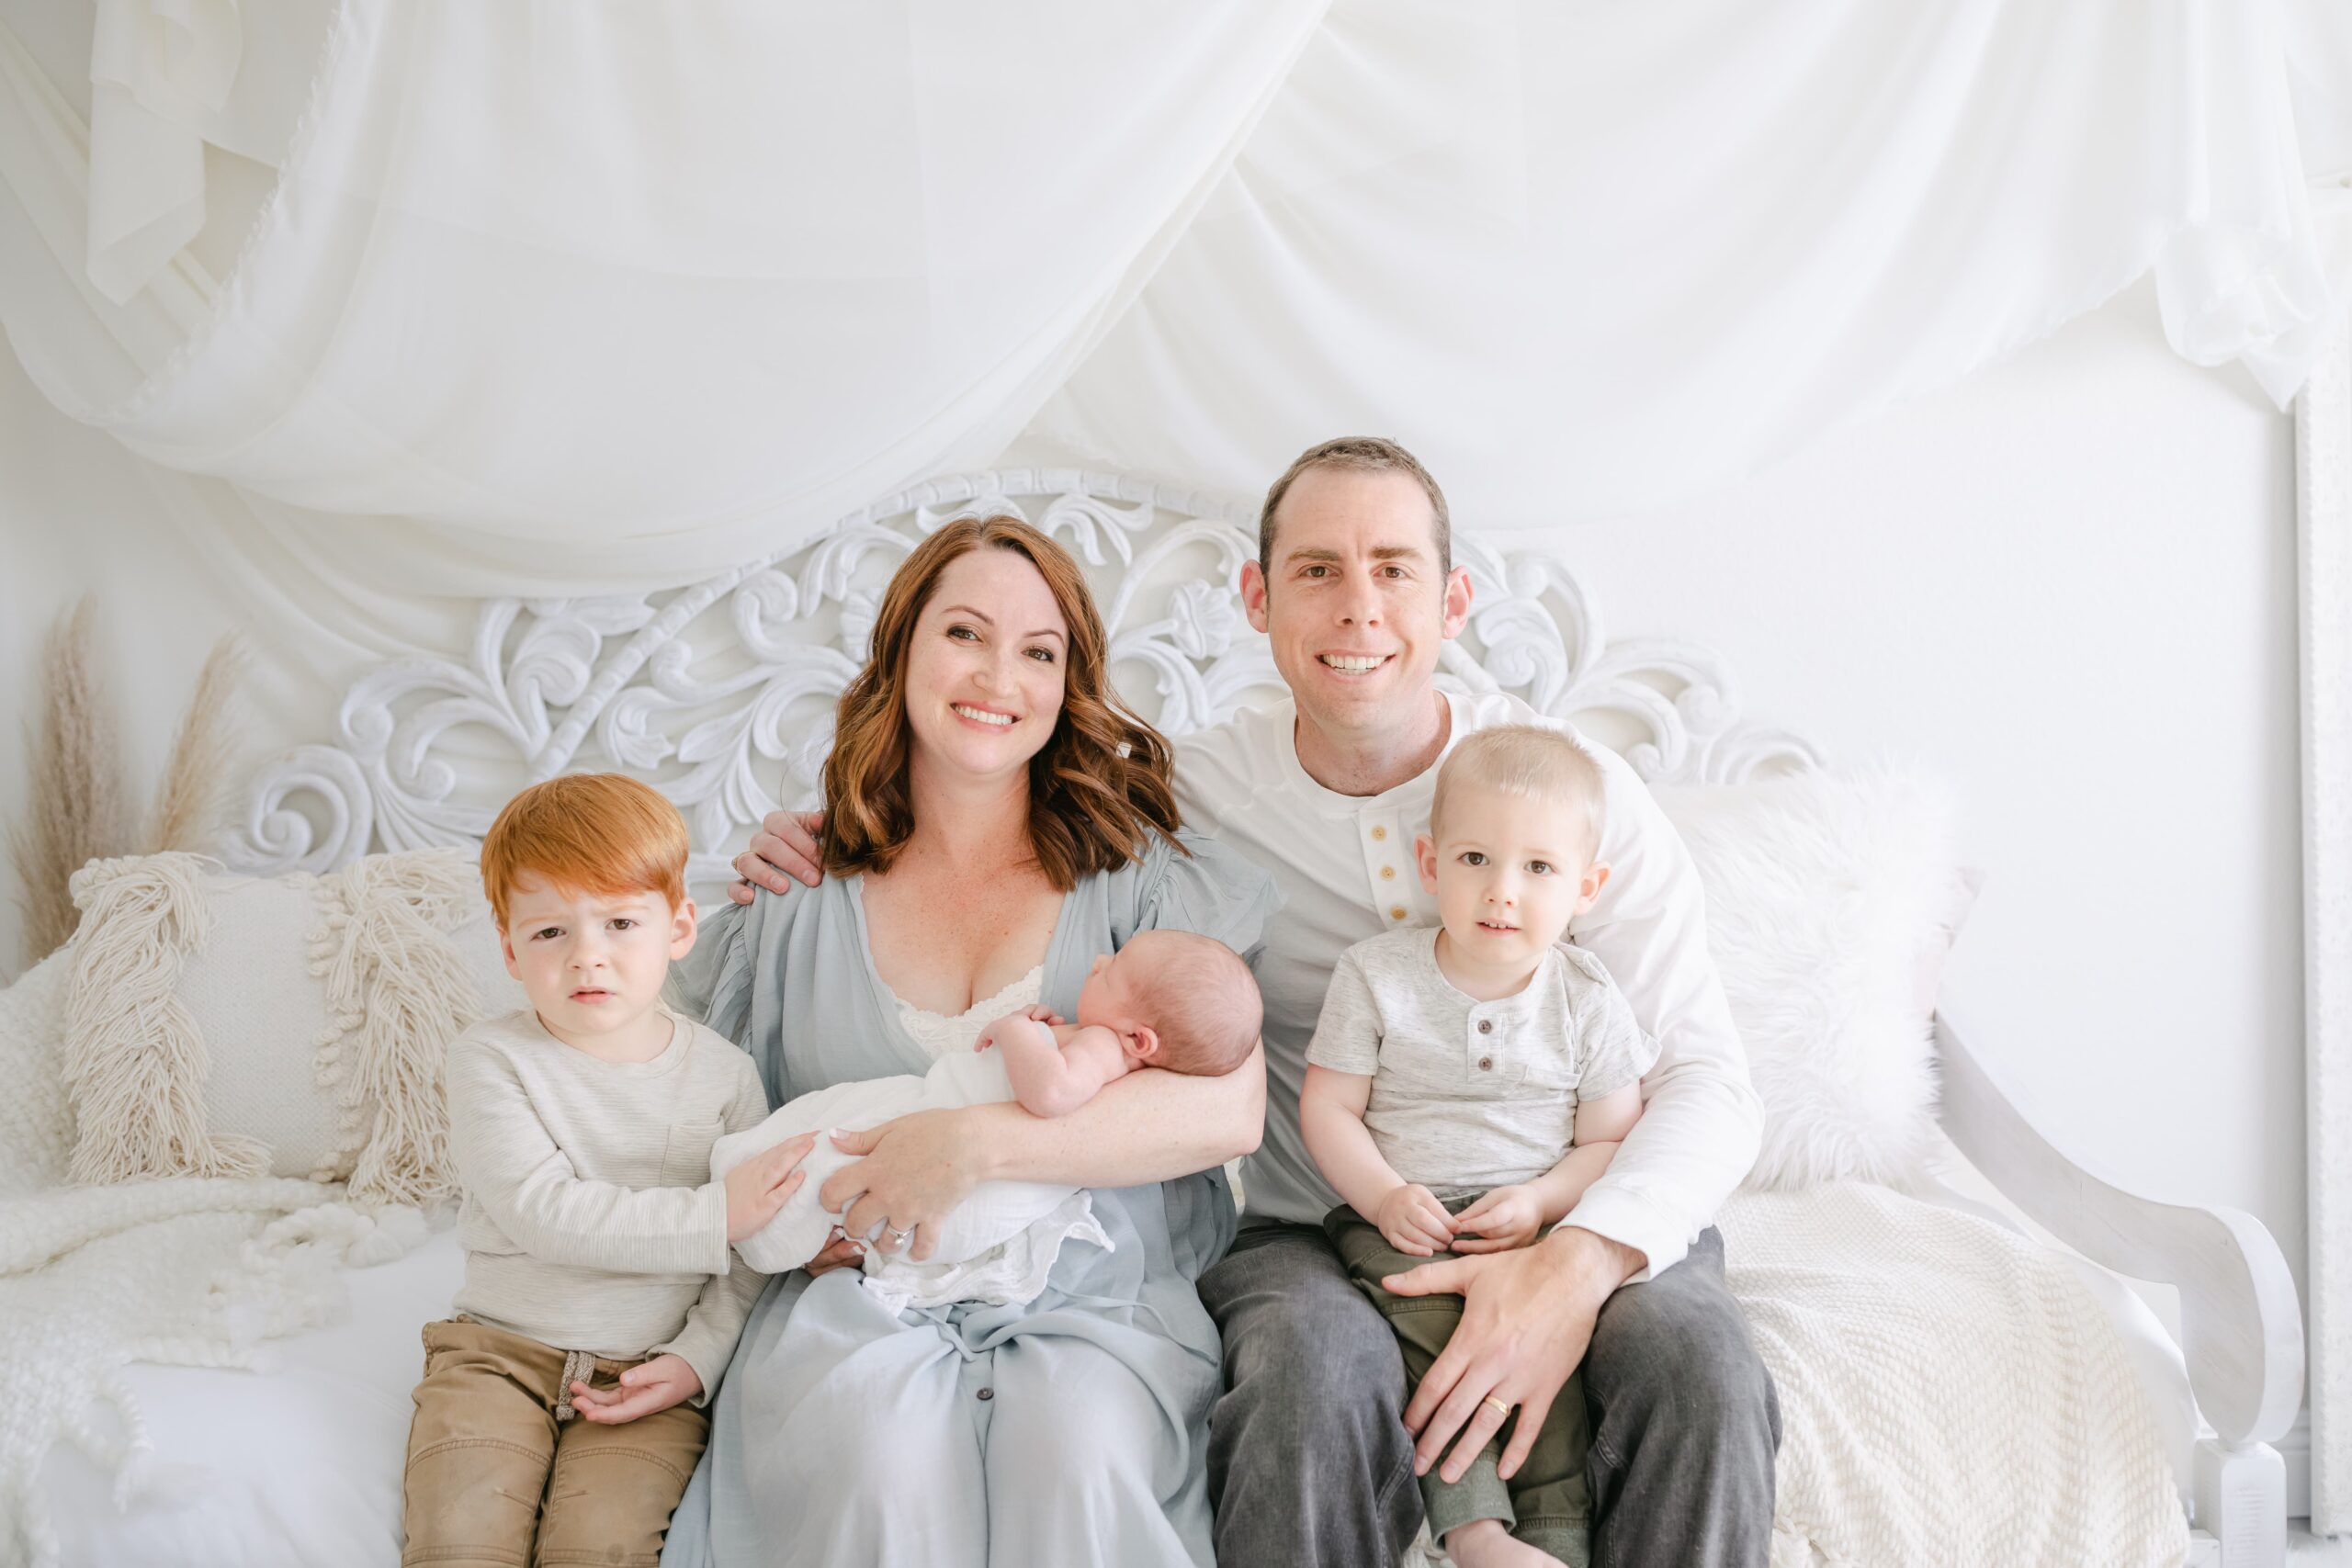 A mom and dad smile while sitting on a day bed in a studio with their newborn baby and two toddler sons